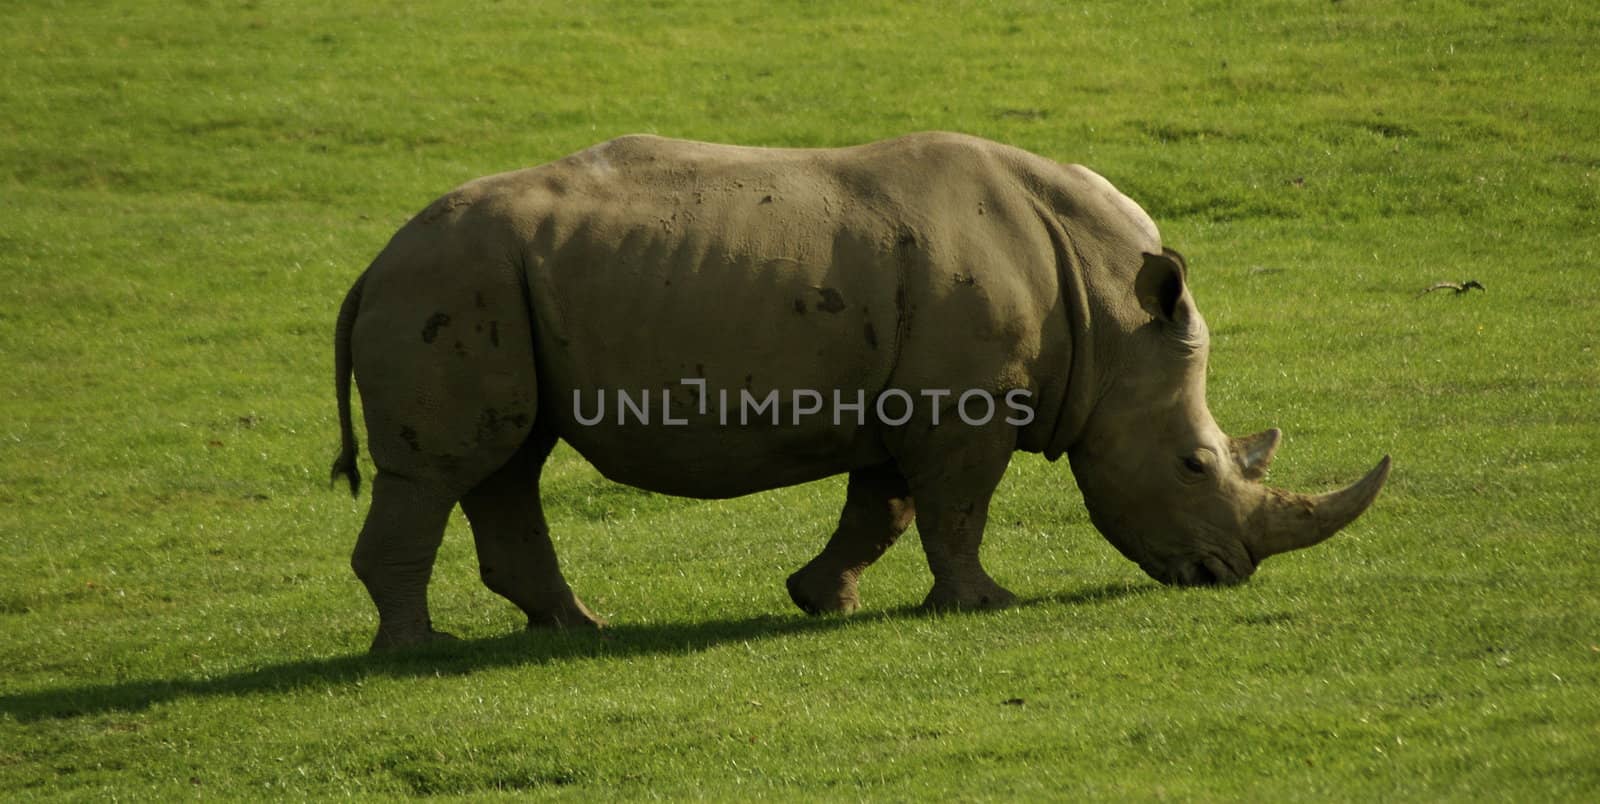 Solo walking Rhinoceros against green grass, taken profile on with horn apparent.







Solo Rhinocerous walking profile on against a green grass back ground.







Solo Rhinocerous